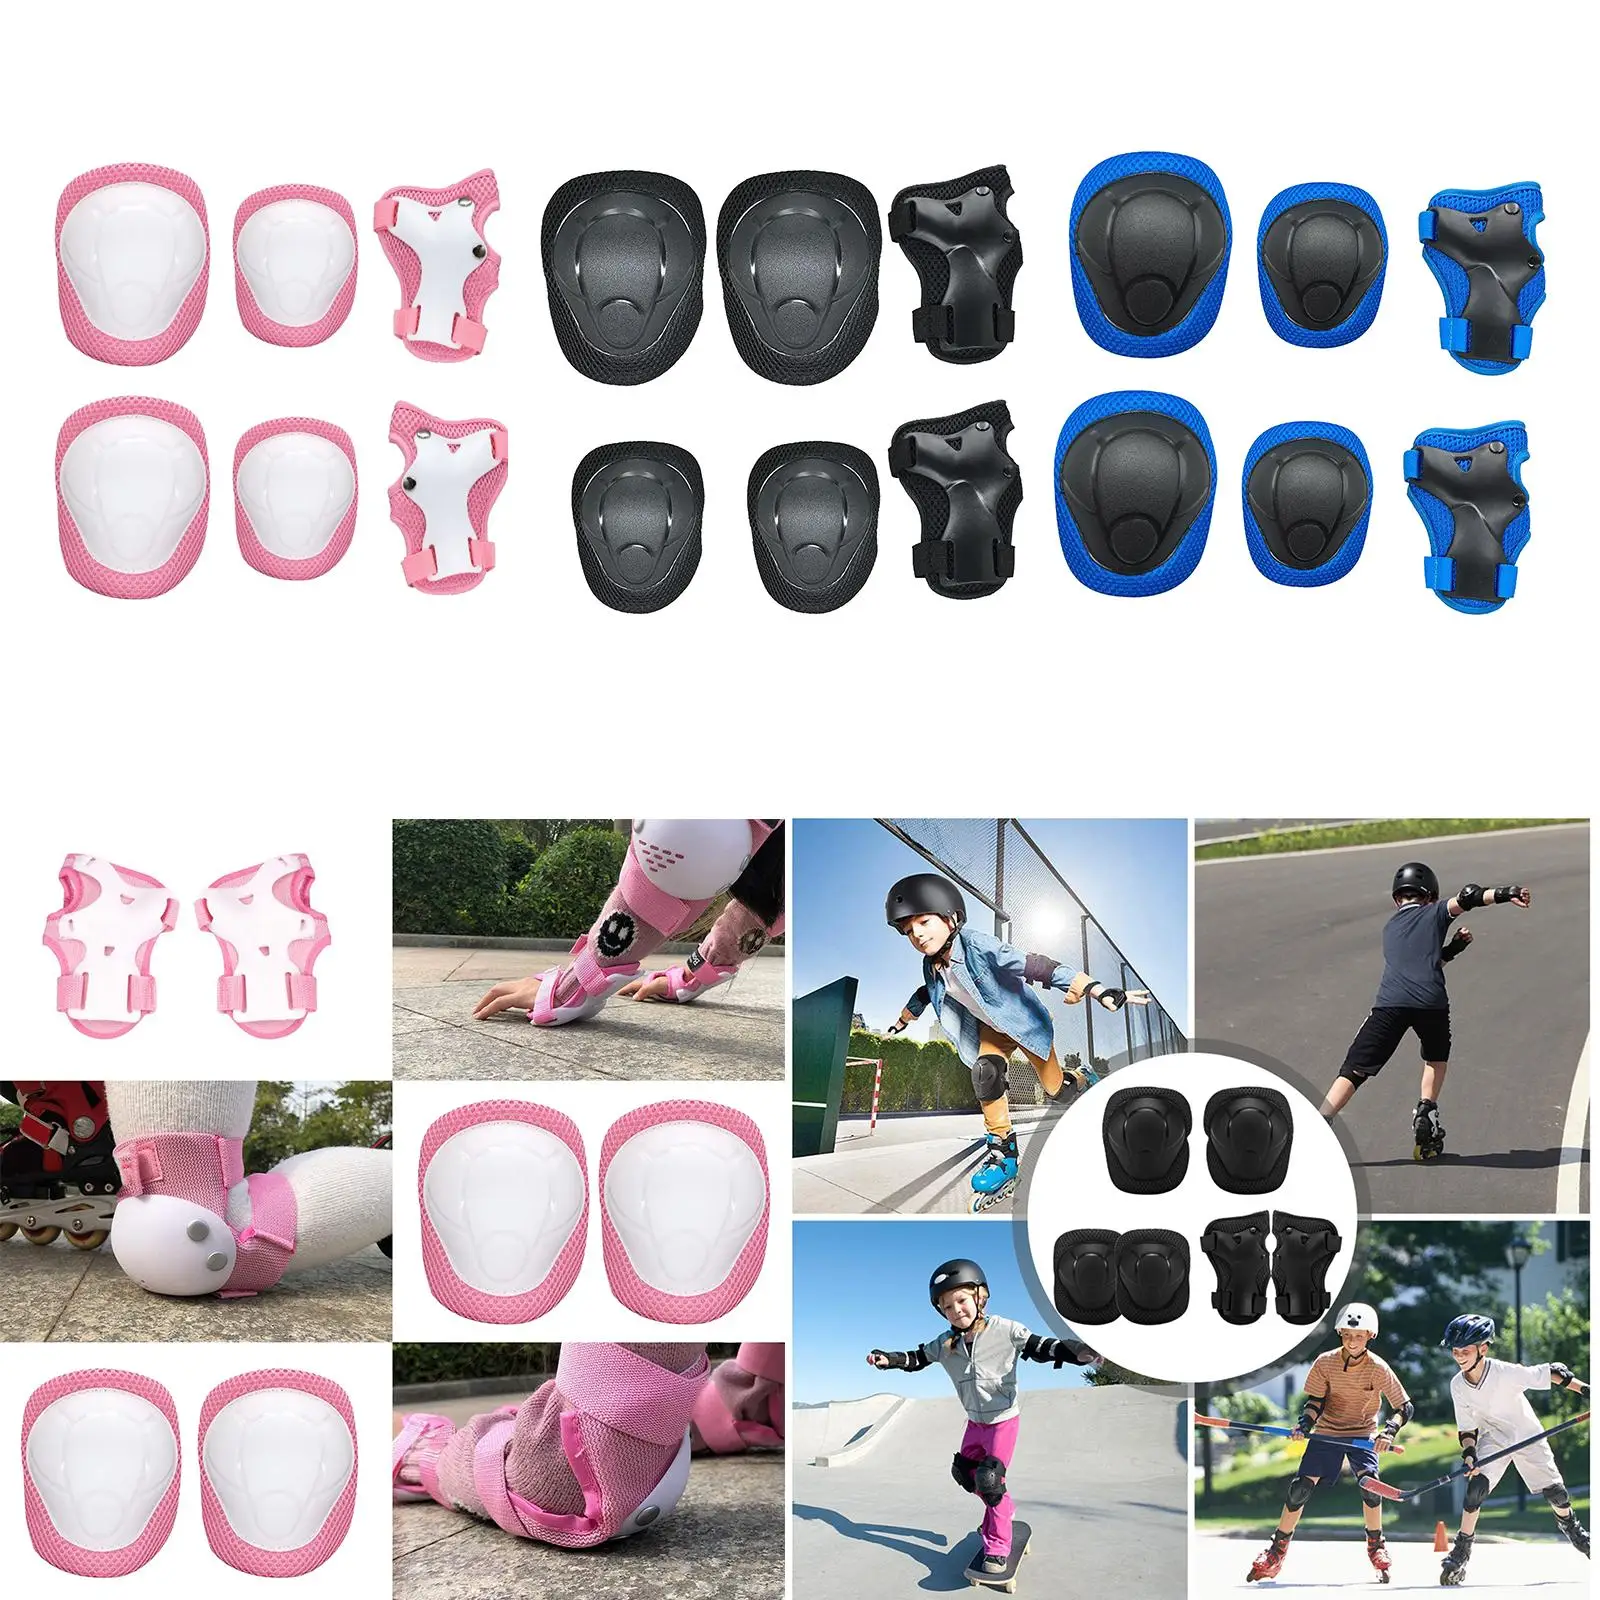 Kids Toddler Knee Pad Elbow Pads Wrist Guards Protective Gear Set for Cycling Skateboard Inline Skatings Riding 